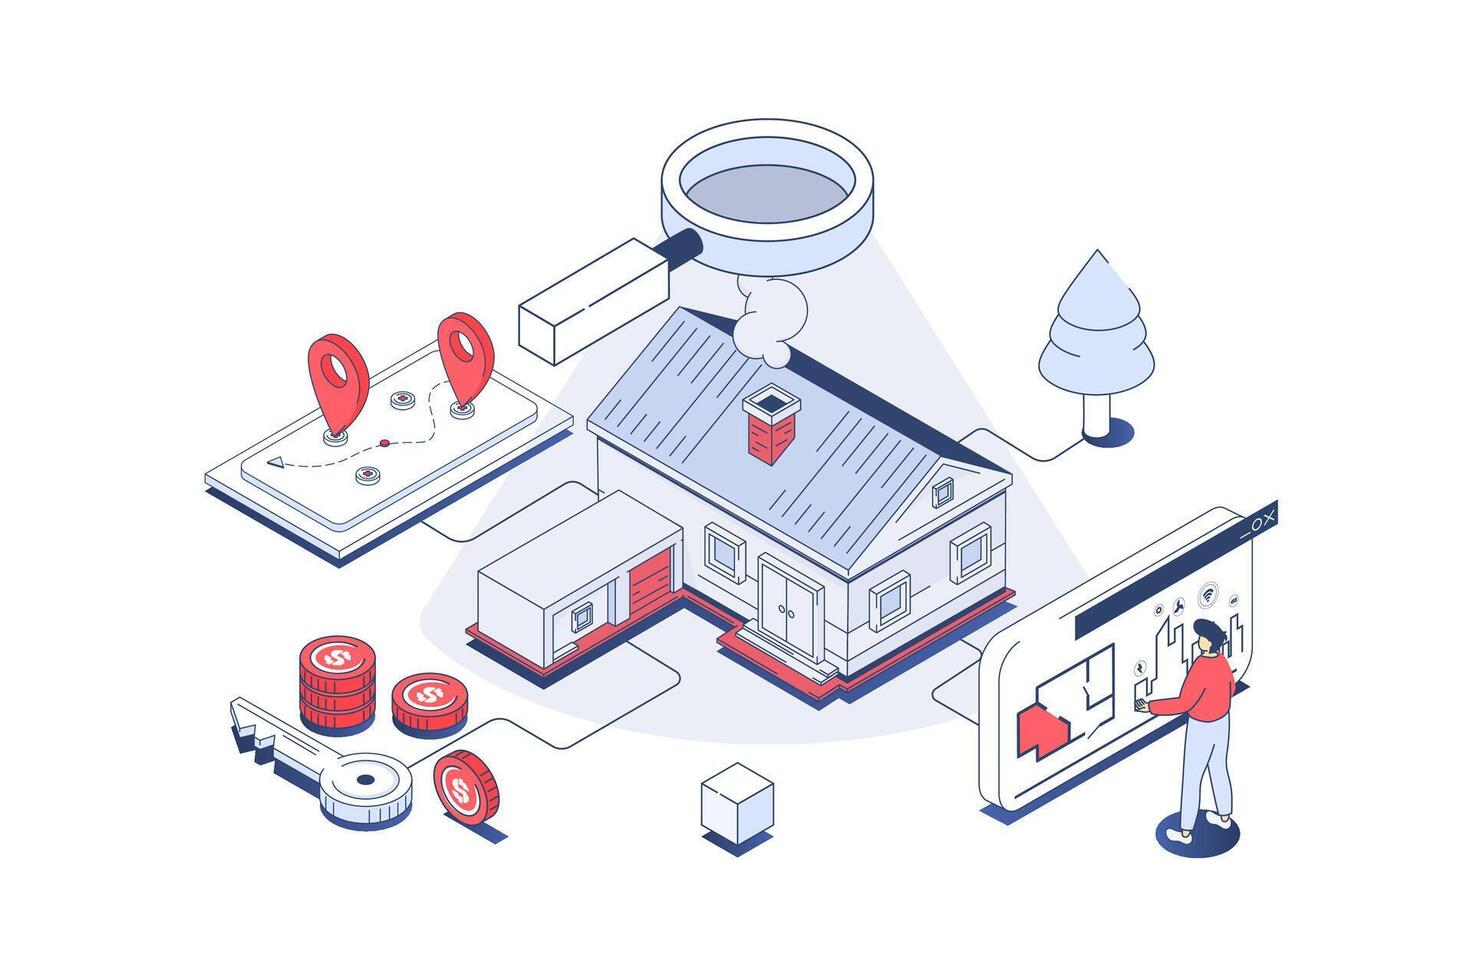 Real estate concept in 3d isometric design. Man researching architect blueprints, searching new home at housing market, buying property. Vector illustration with isometry people scene for web graphic